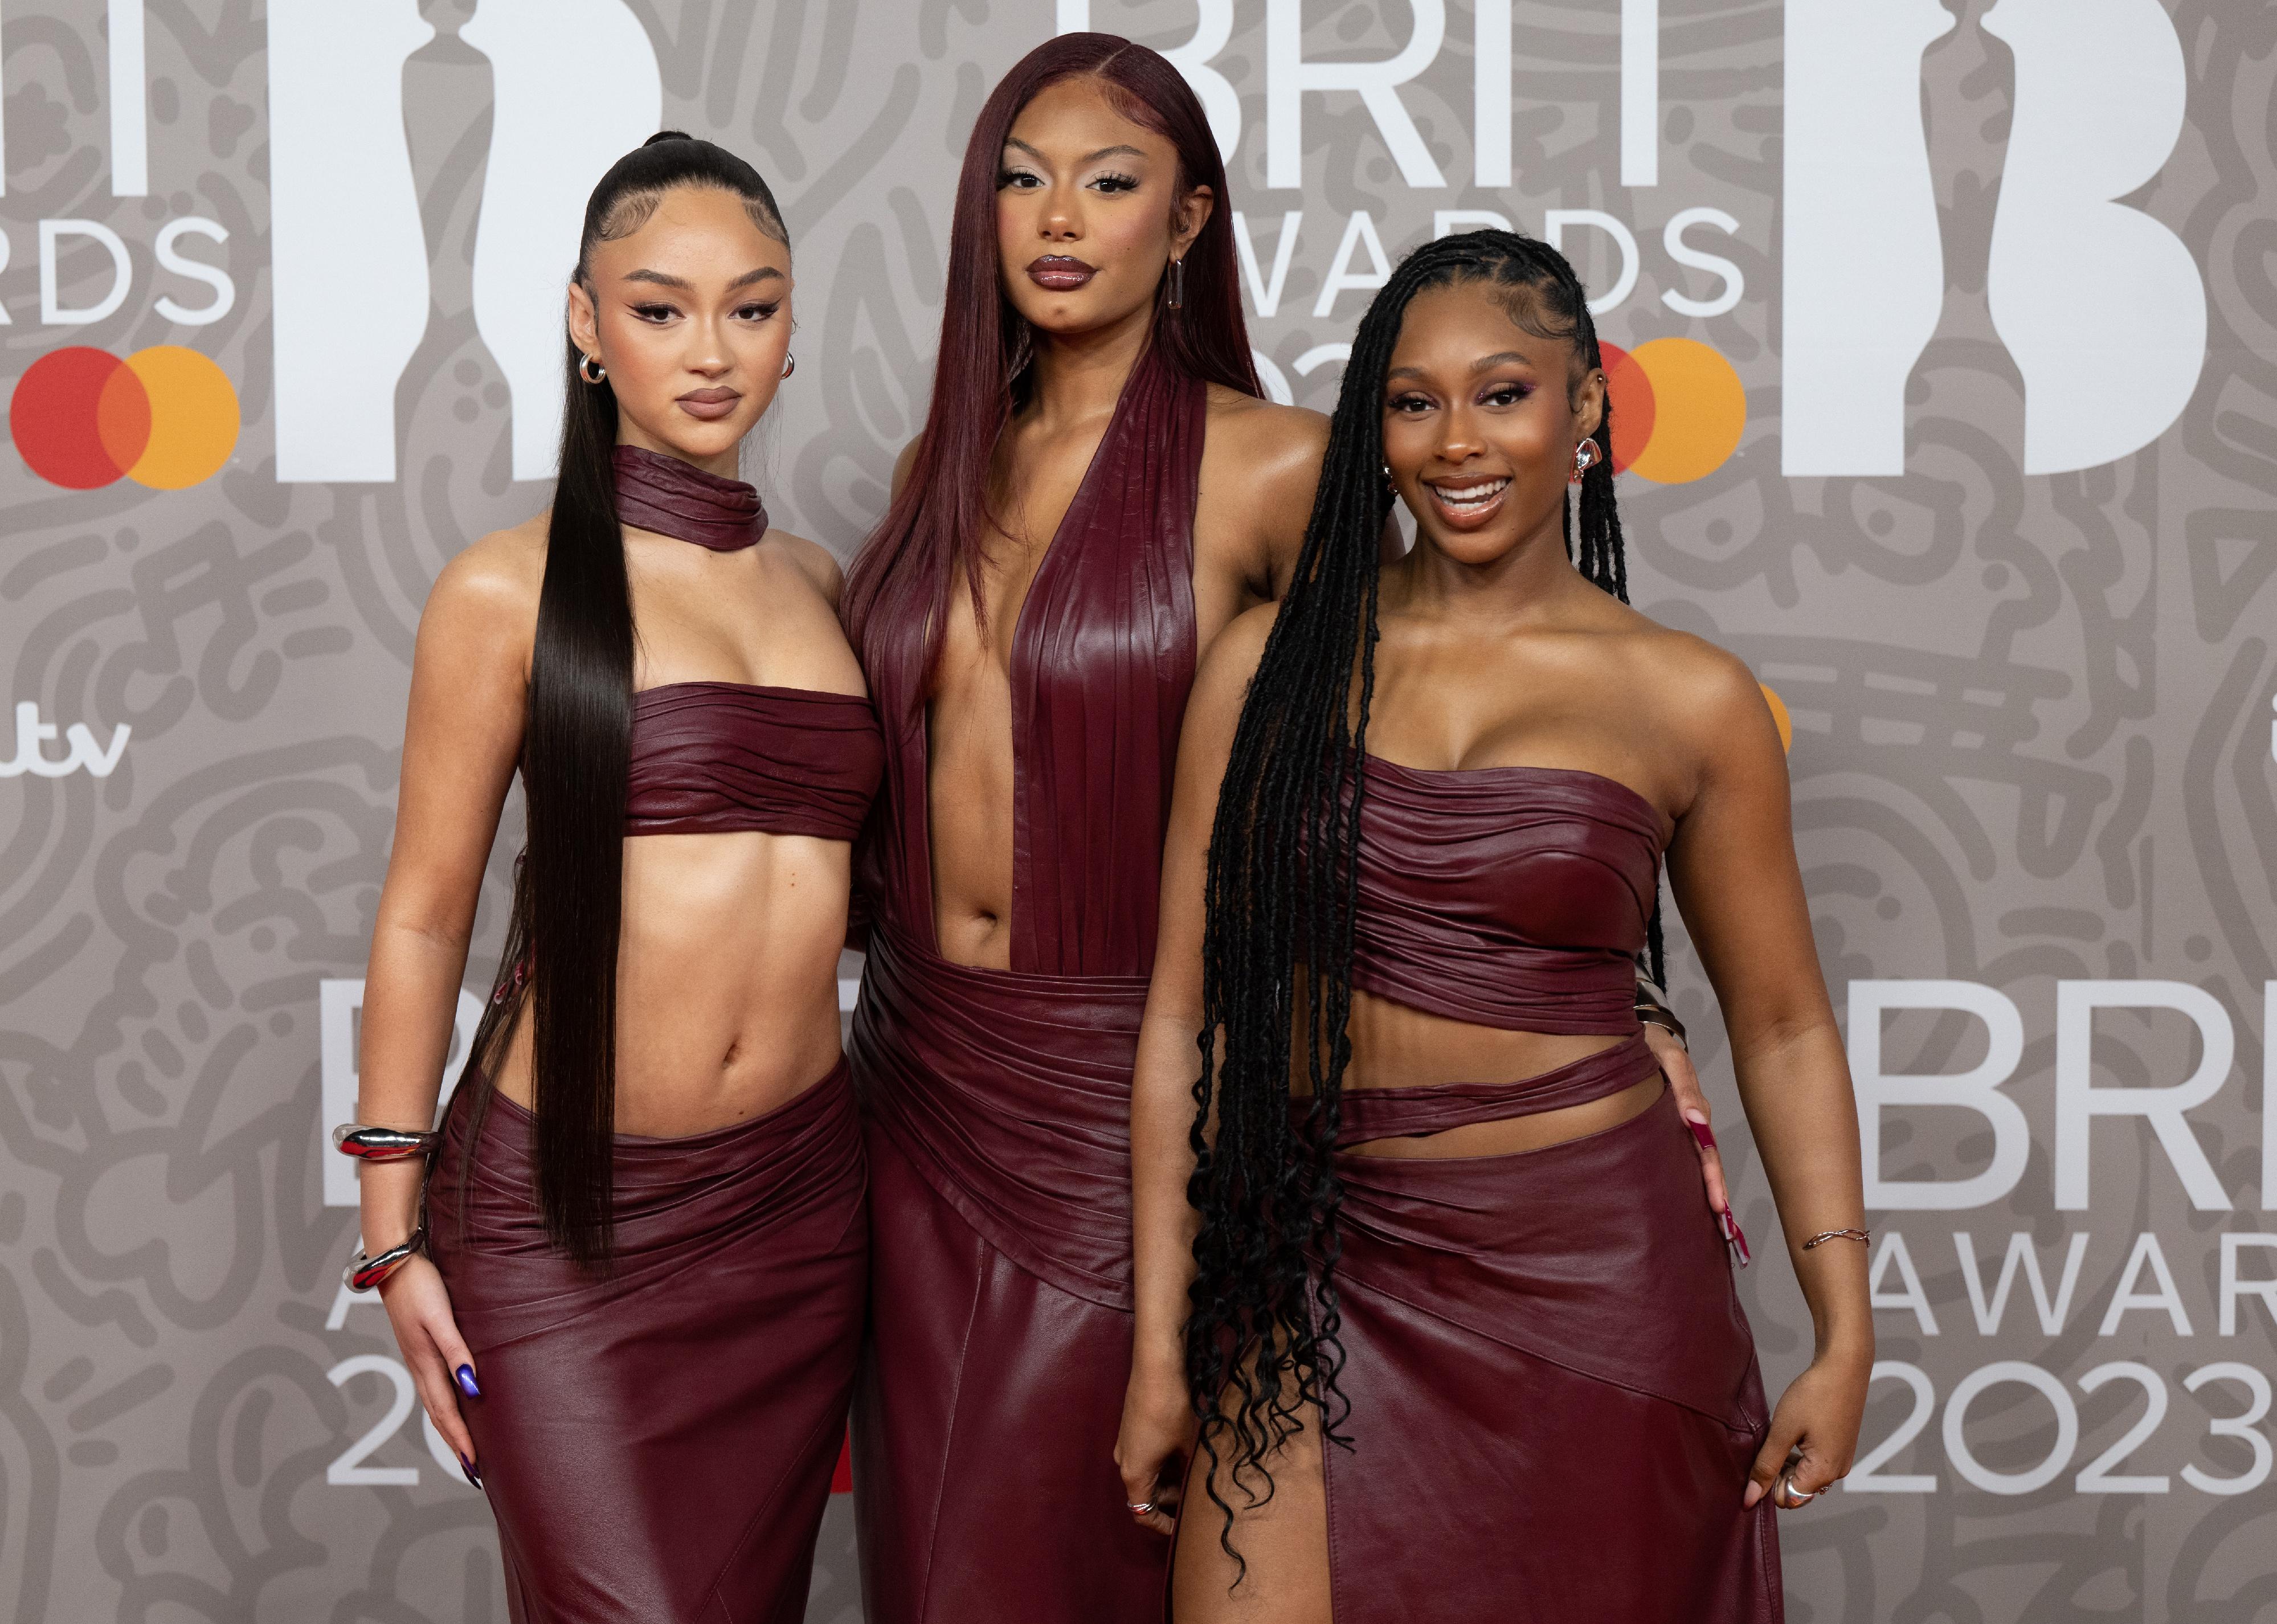 Jorja Douglas, Stella Quaresma and Renée Downer of Flo in matching burgundy leather outfits.